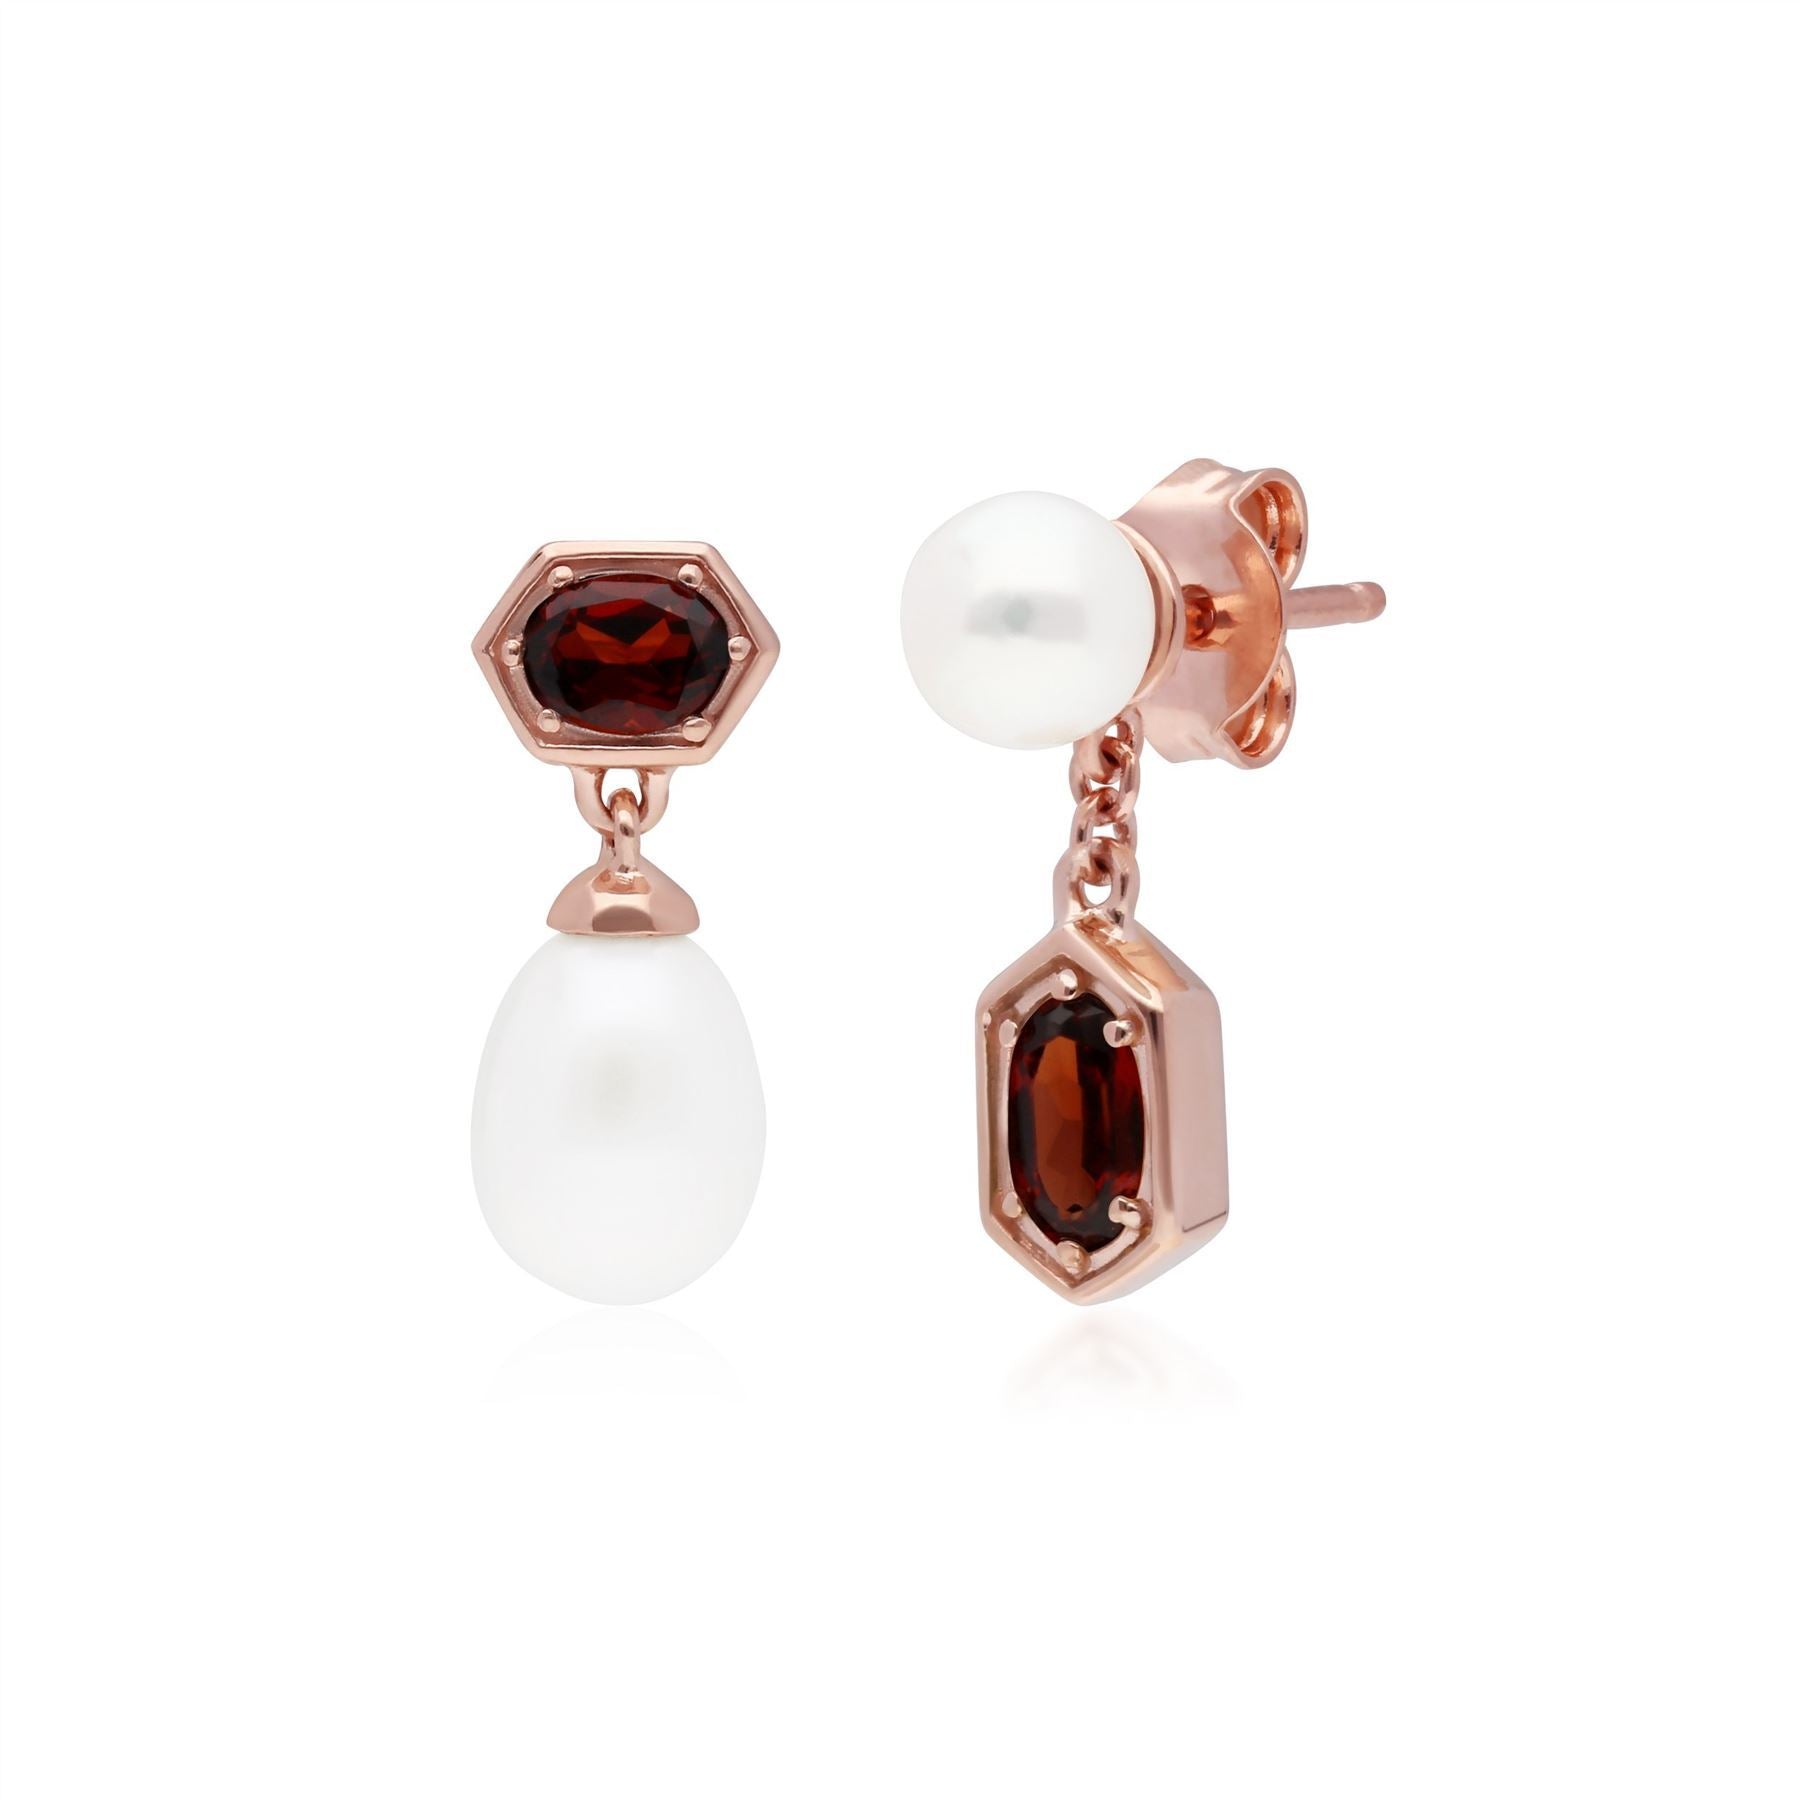 Modern Pearl & Garnet Mismatched Drop Earrings in Rose Gold Plated Sterling Silver